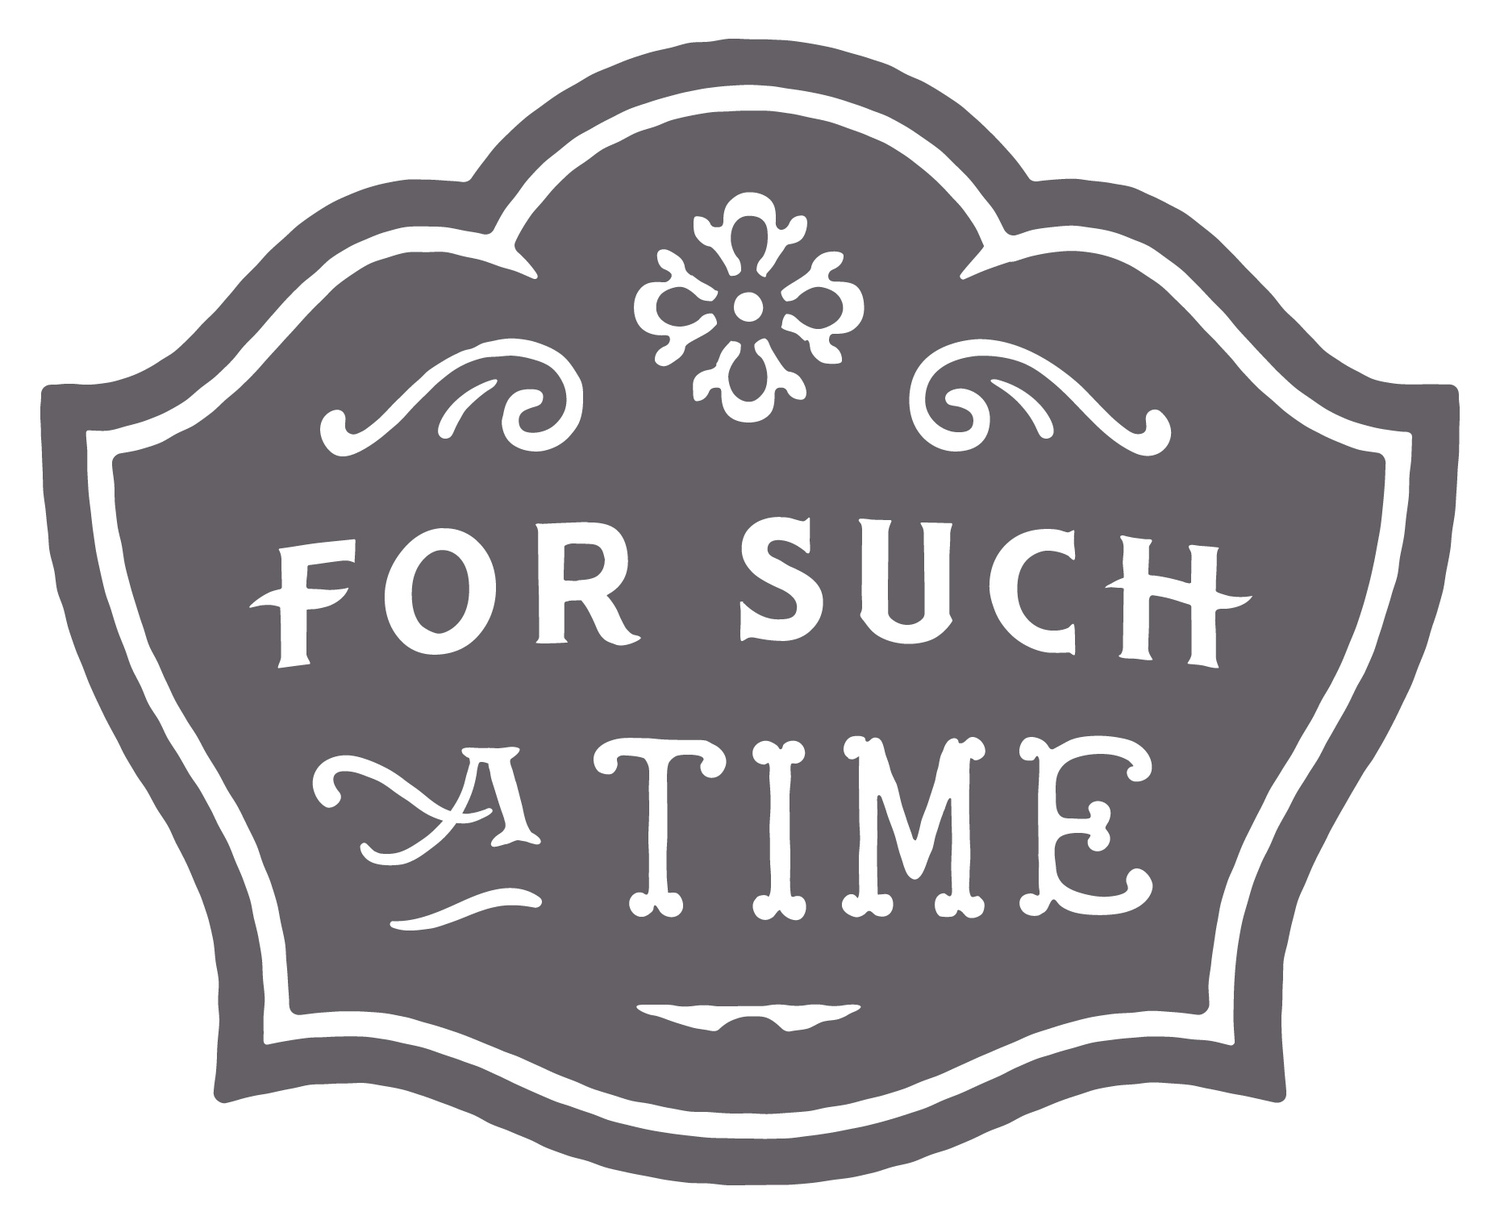 For Such A Time Designs